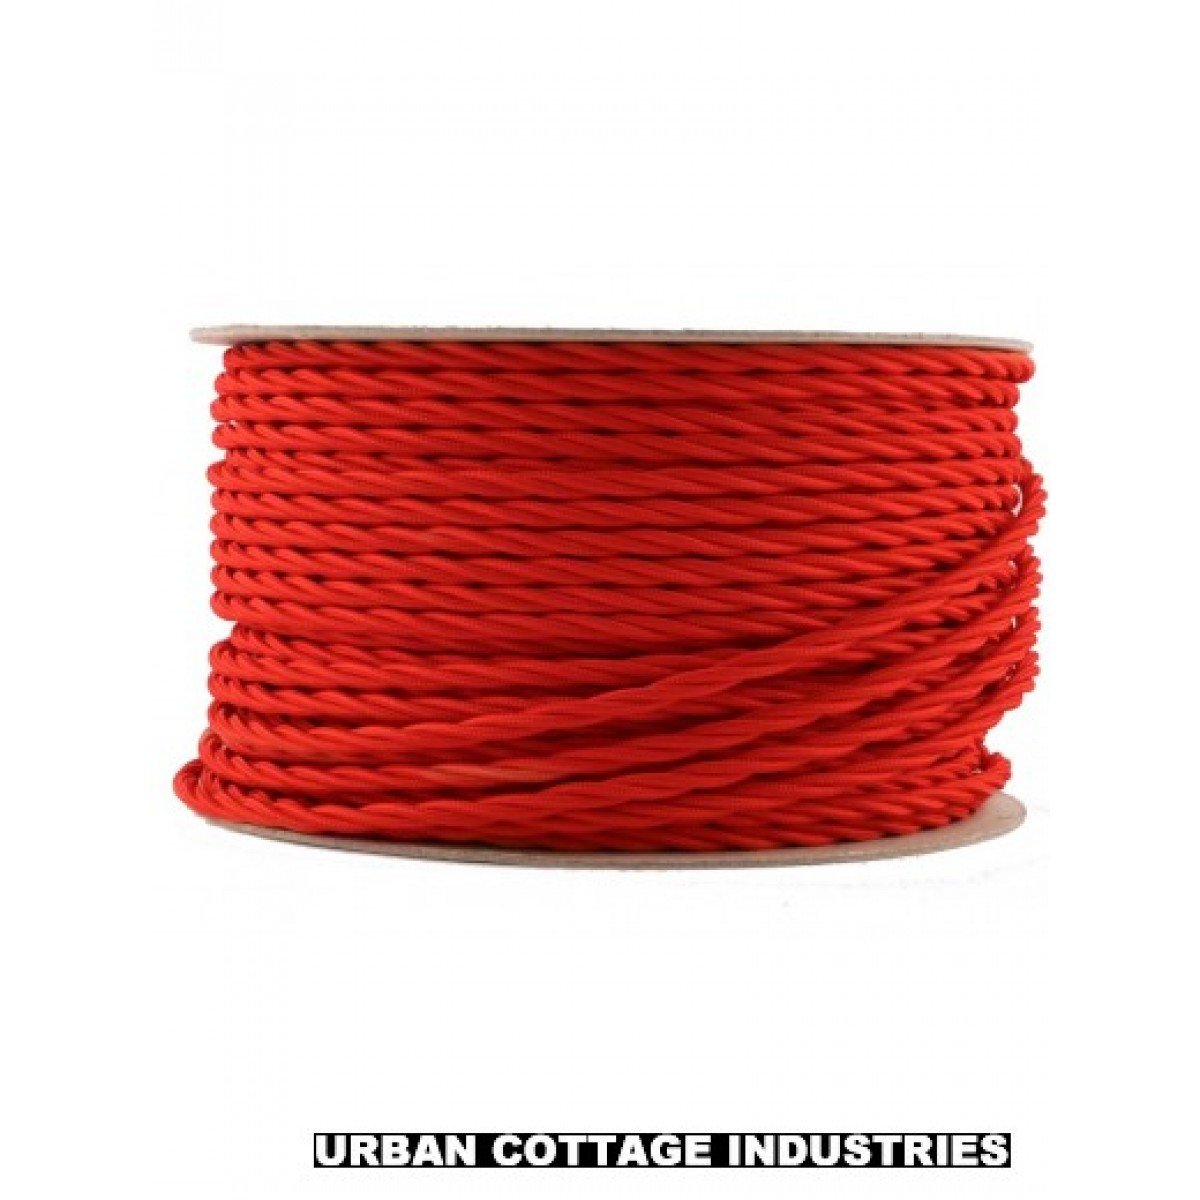 2 Core Twisted Red Vintage Electric fabric Cable Flex 0.75mm